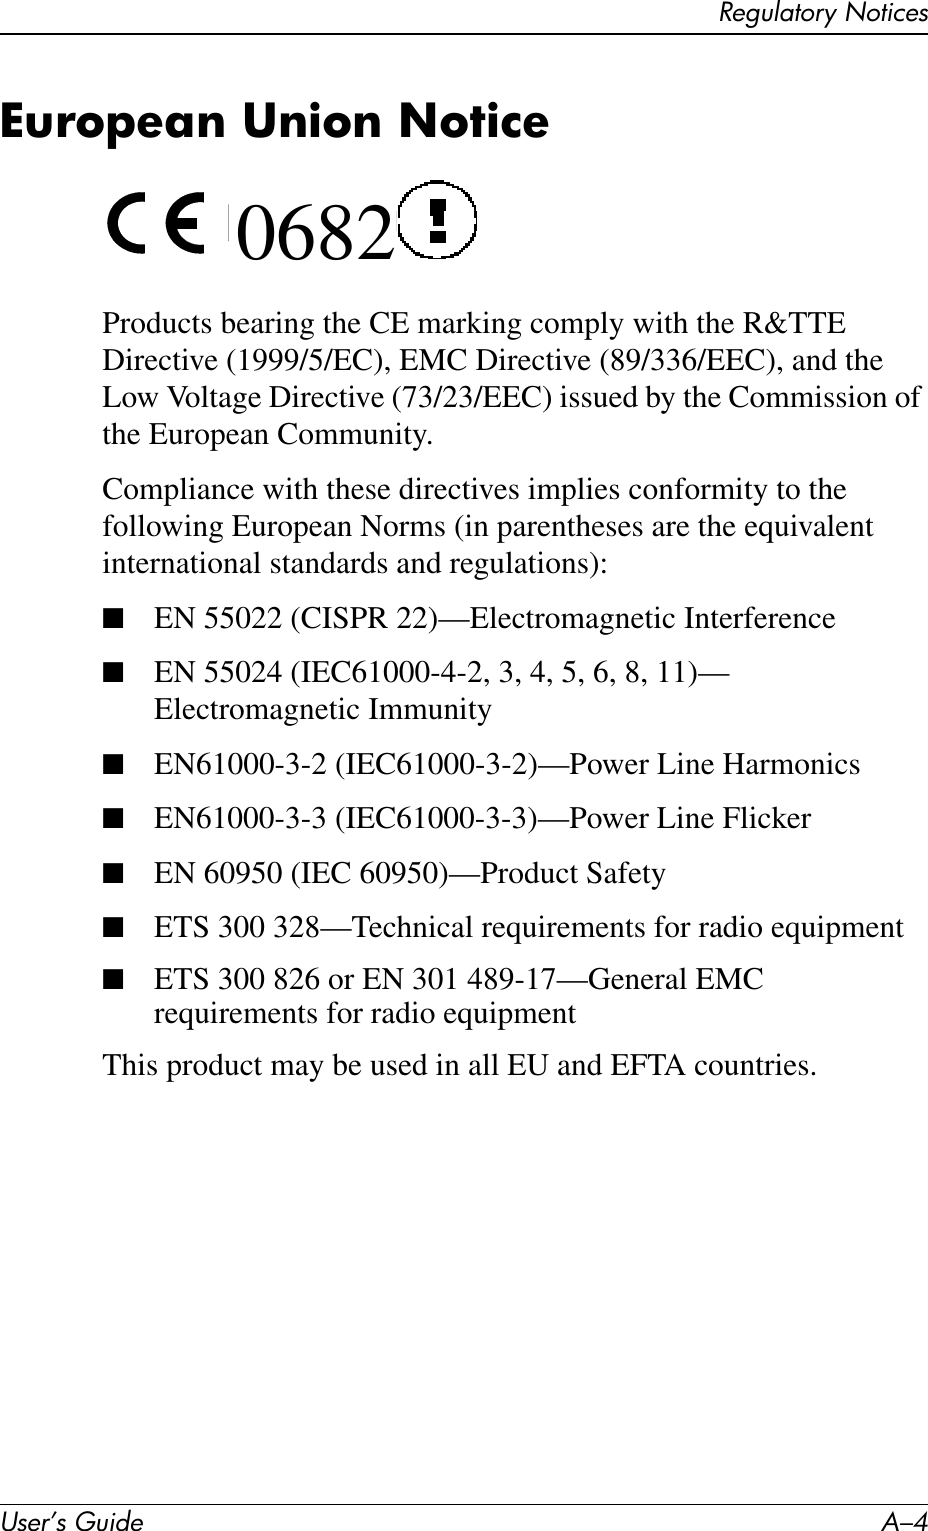 User’s Guide A–4Regulatory NoticesEuropean Union Notice 0682Products bearing the CE marking comply with the R&amp;TTE Directive (1999/5/EC), EMC Directive (89/336/EEC), and the Low Voltage Directive (73/23/EEC) issued by the Commission of the European Community.Compliance with these directives implies conformity to the following European Norms (in parentheses are the equivalent international standards and regulations):■EN 55022 (CISPR 22)—Electromagnetic Interference■EN 55024 (IEC61000-4-2, 3, 4, 5, 6, 8, 11)— Electromagnetic Immunity■EN61000-3-2 (IEC61000-3-2)—Power Line Harmonics■EN61000-3-3 (IEC61000-3-3)—Power Line Flicker■EN 60950 (IEC 60950)—Product Safety■ETS 300 328—Technical requirements for radio equipment■ETS 300 826 or EN 301 489-17—General EMC requirements for radio equipmentThis product may be used in all EU and EFTA countries. 